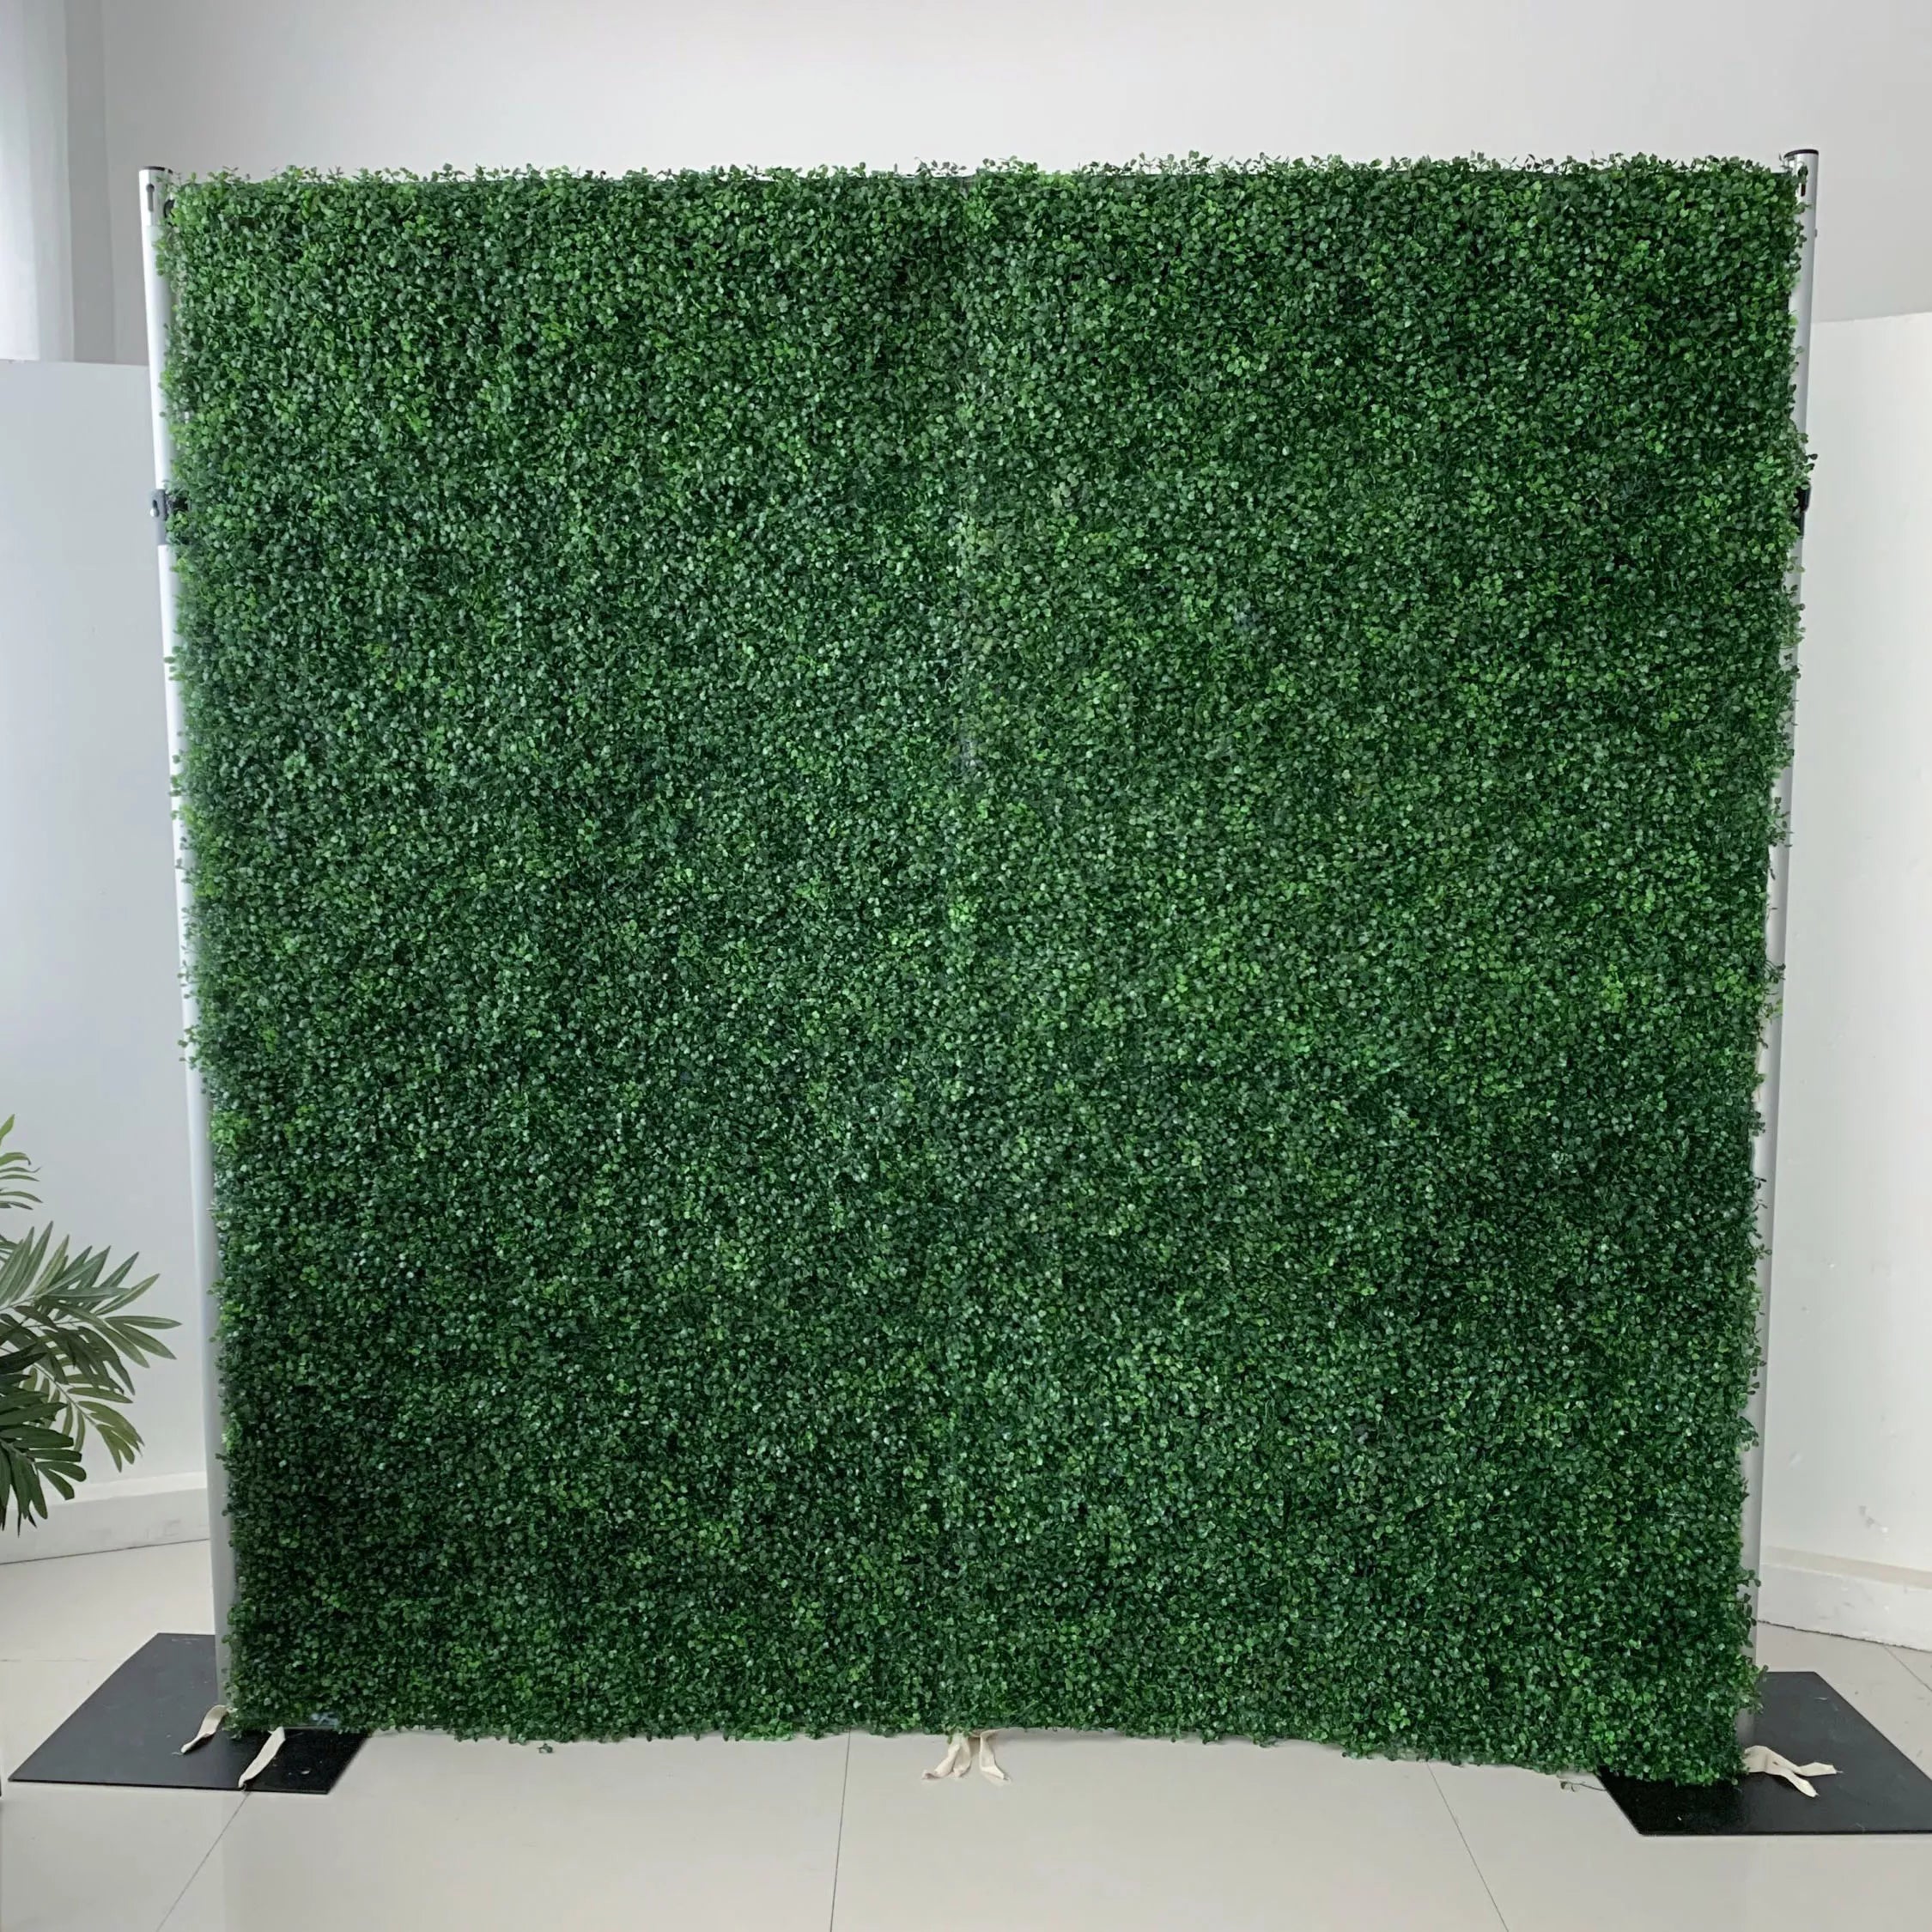 Valar Flowers Roll Up Fabric Artificial Green Grass Wall Wedding Backdrop, Floral Party Decor, Event Photography-VF-086